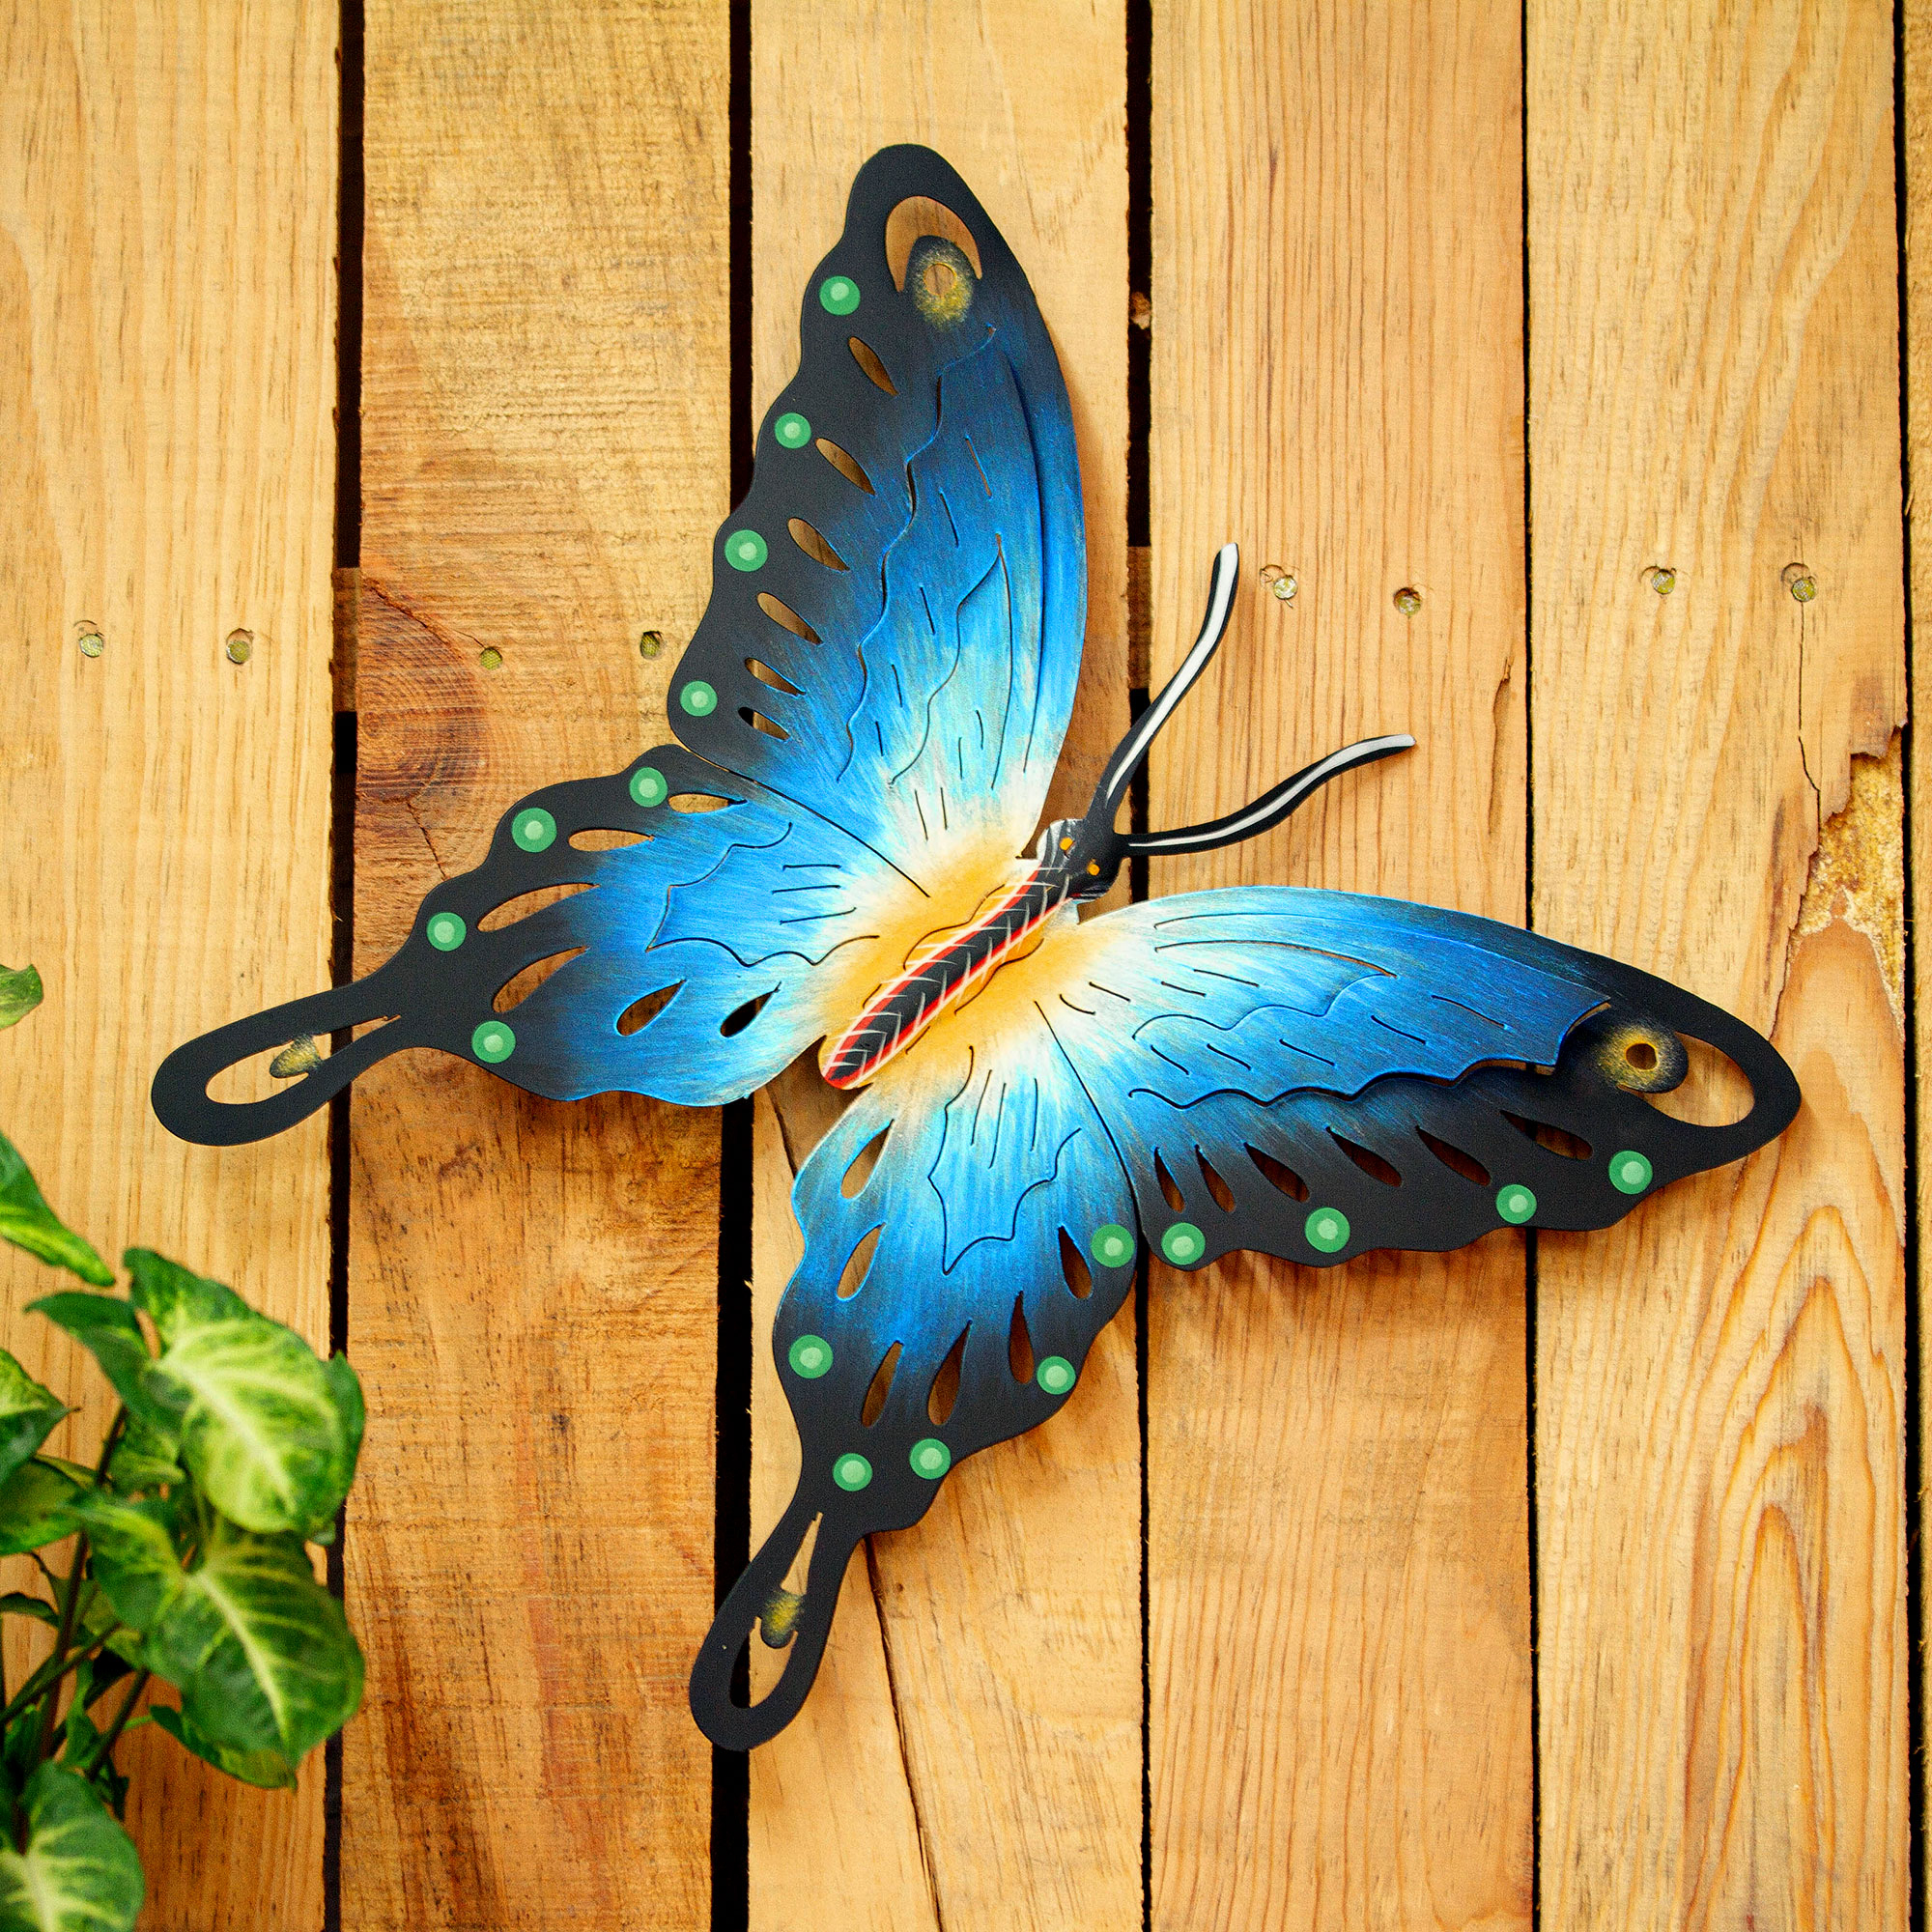 Recycled Metal Butterfly Wall Hanging Handmade in Mexico Fair Trade